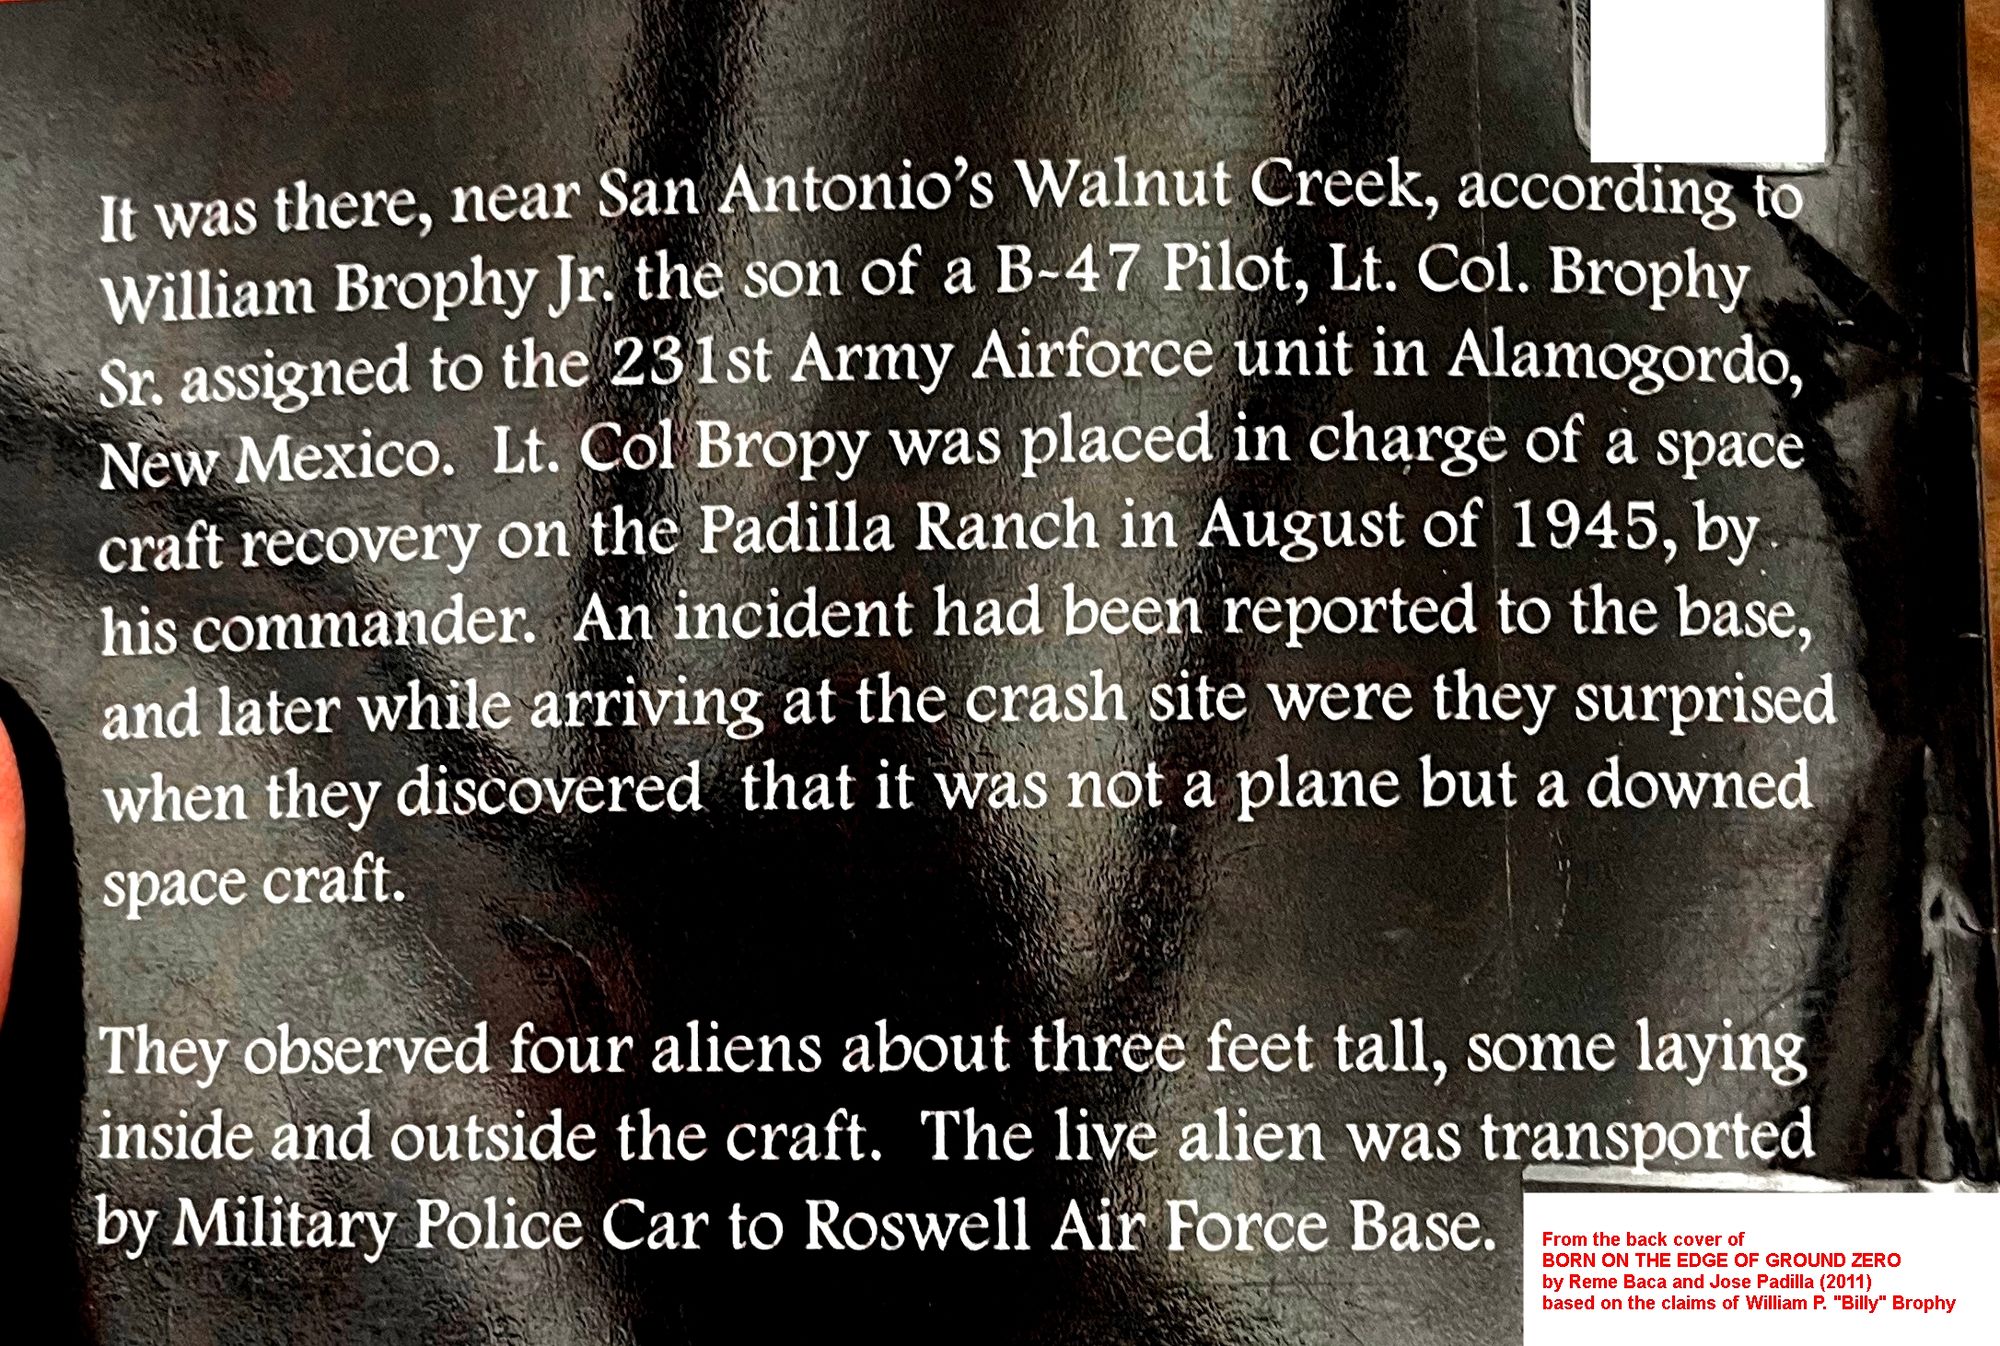 Crash Story File: The Suppressed Tale of the Captured Alien